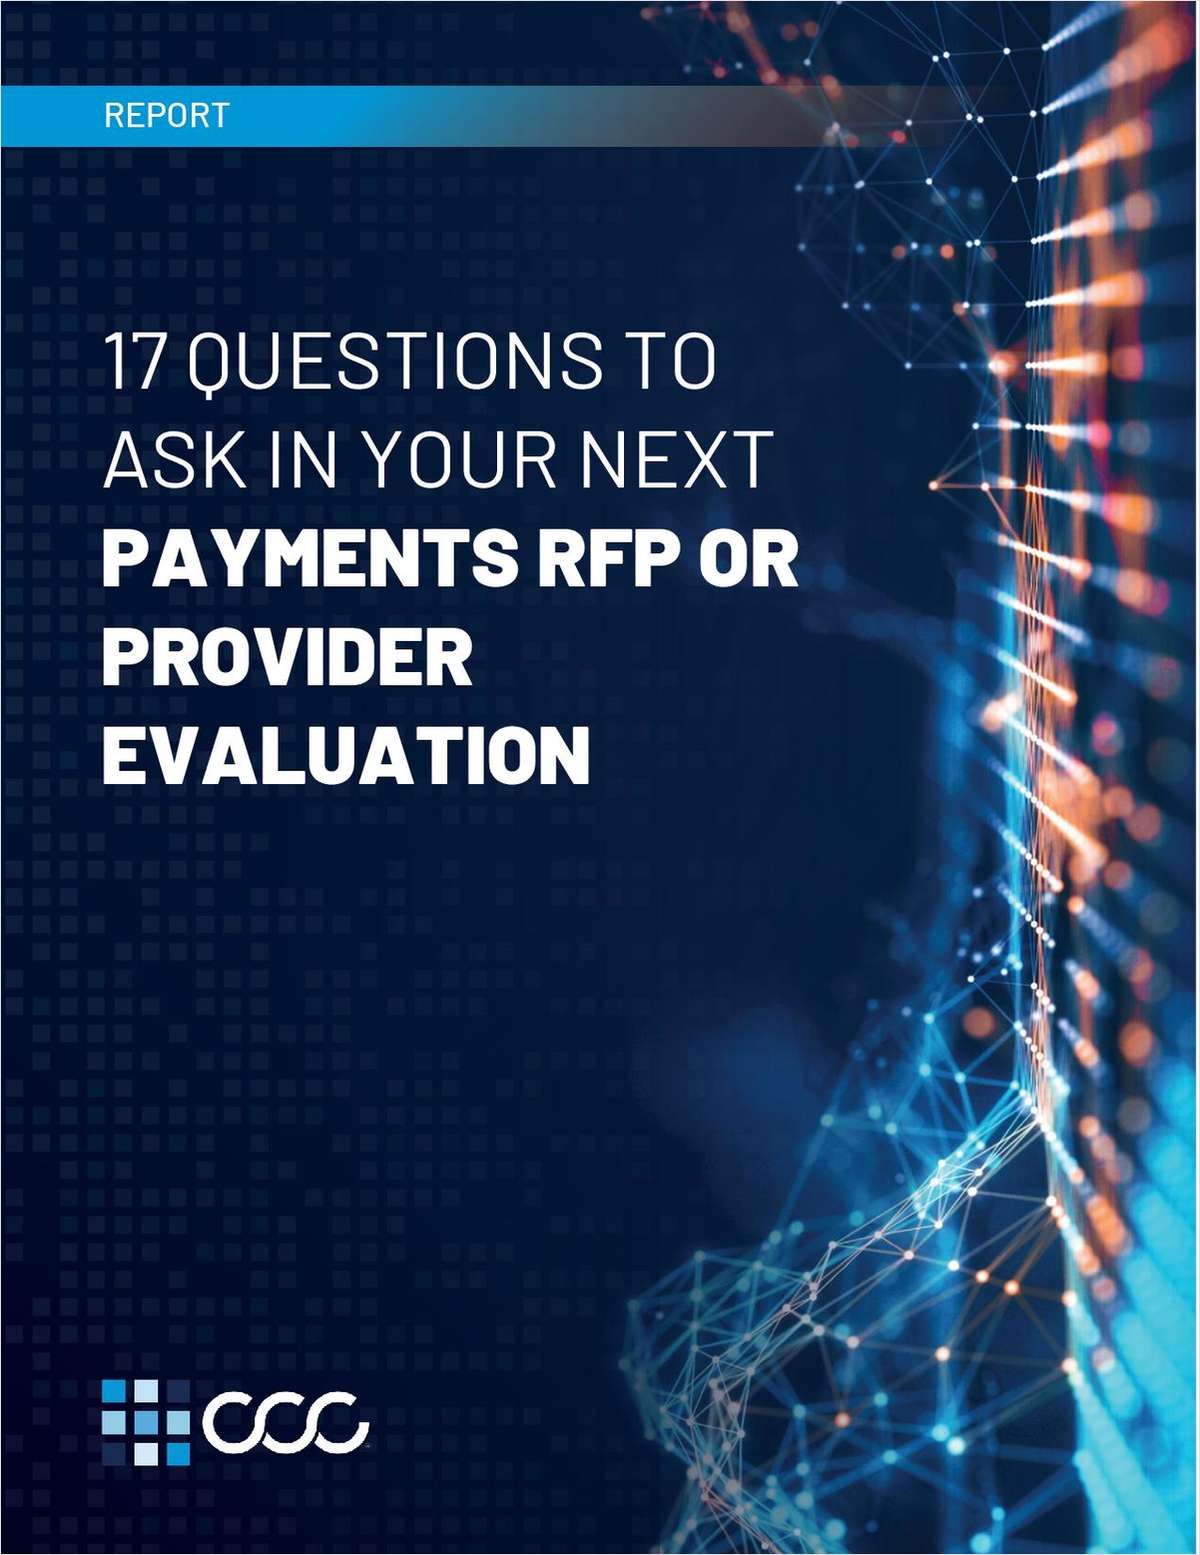 17 Questions To Ask in Your Next Payments RFP or Provider Evaluation link